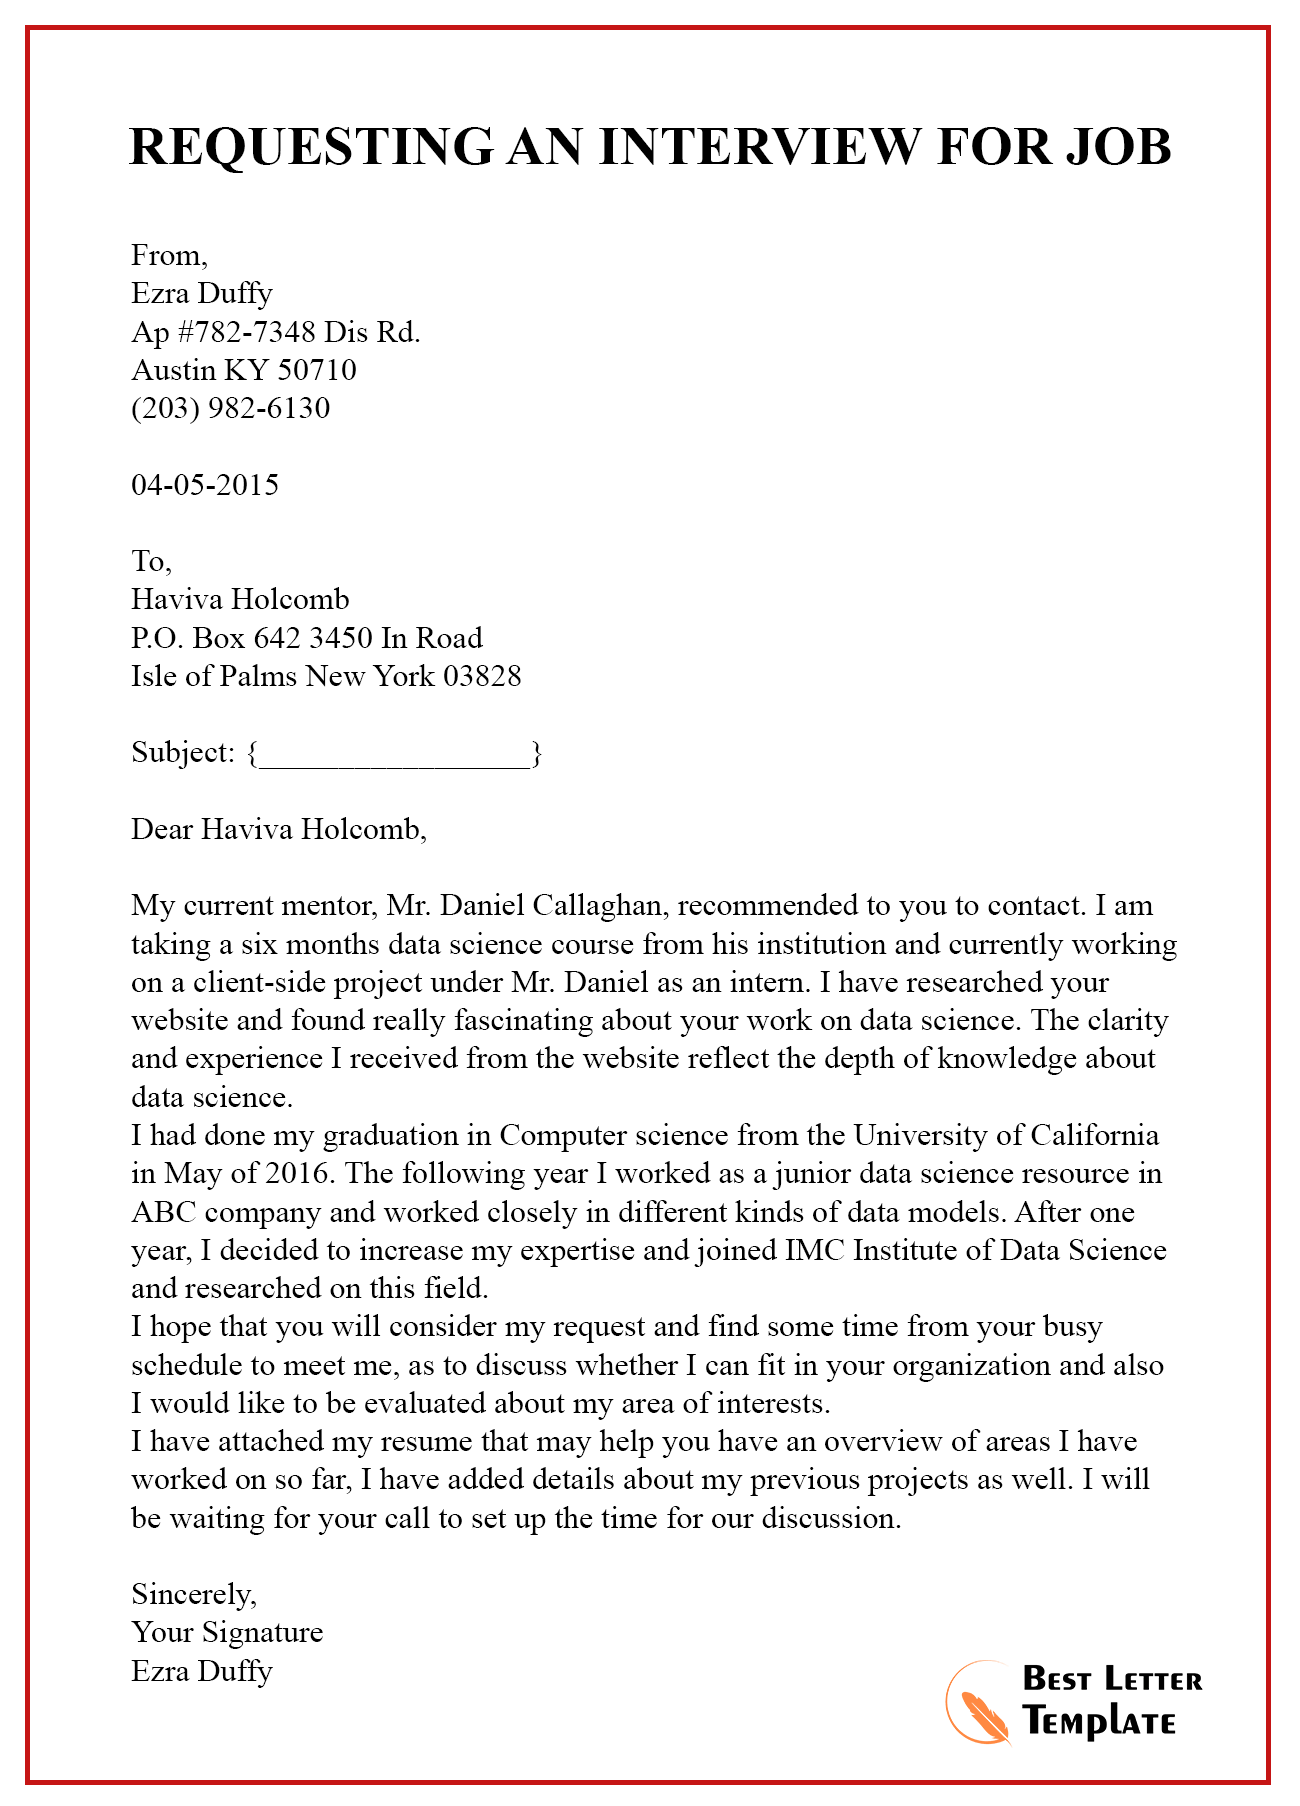 Request An Interview Letter